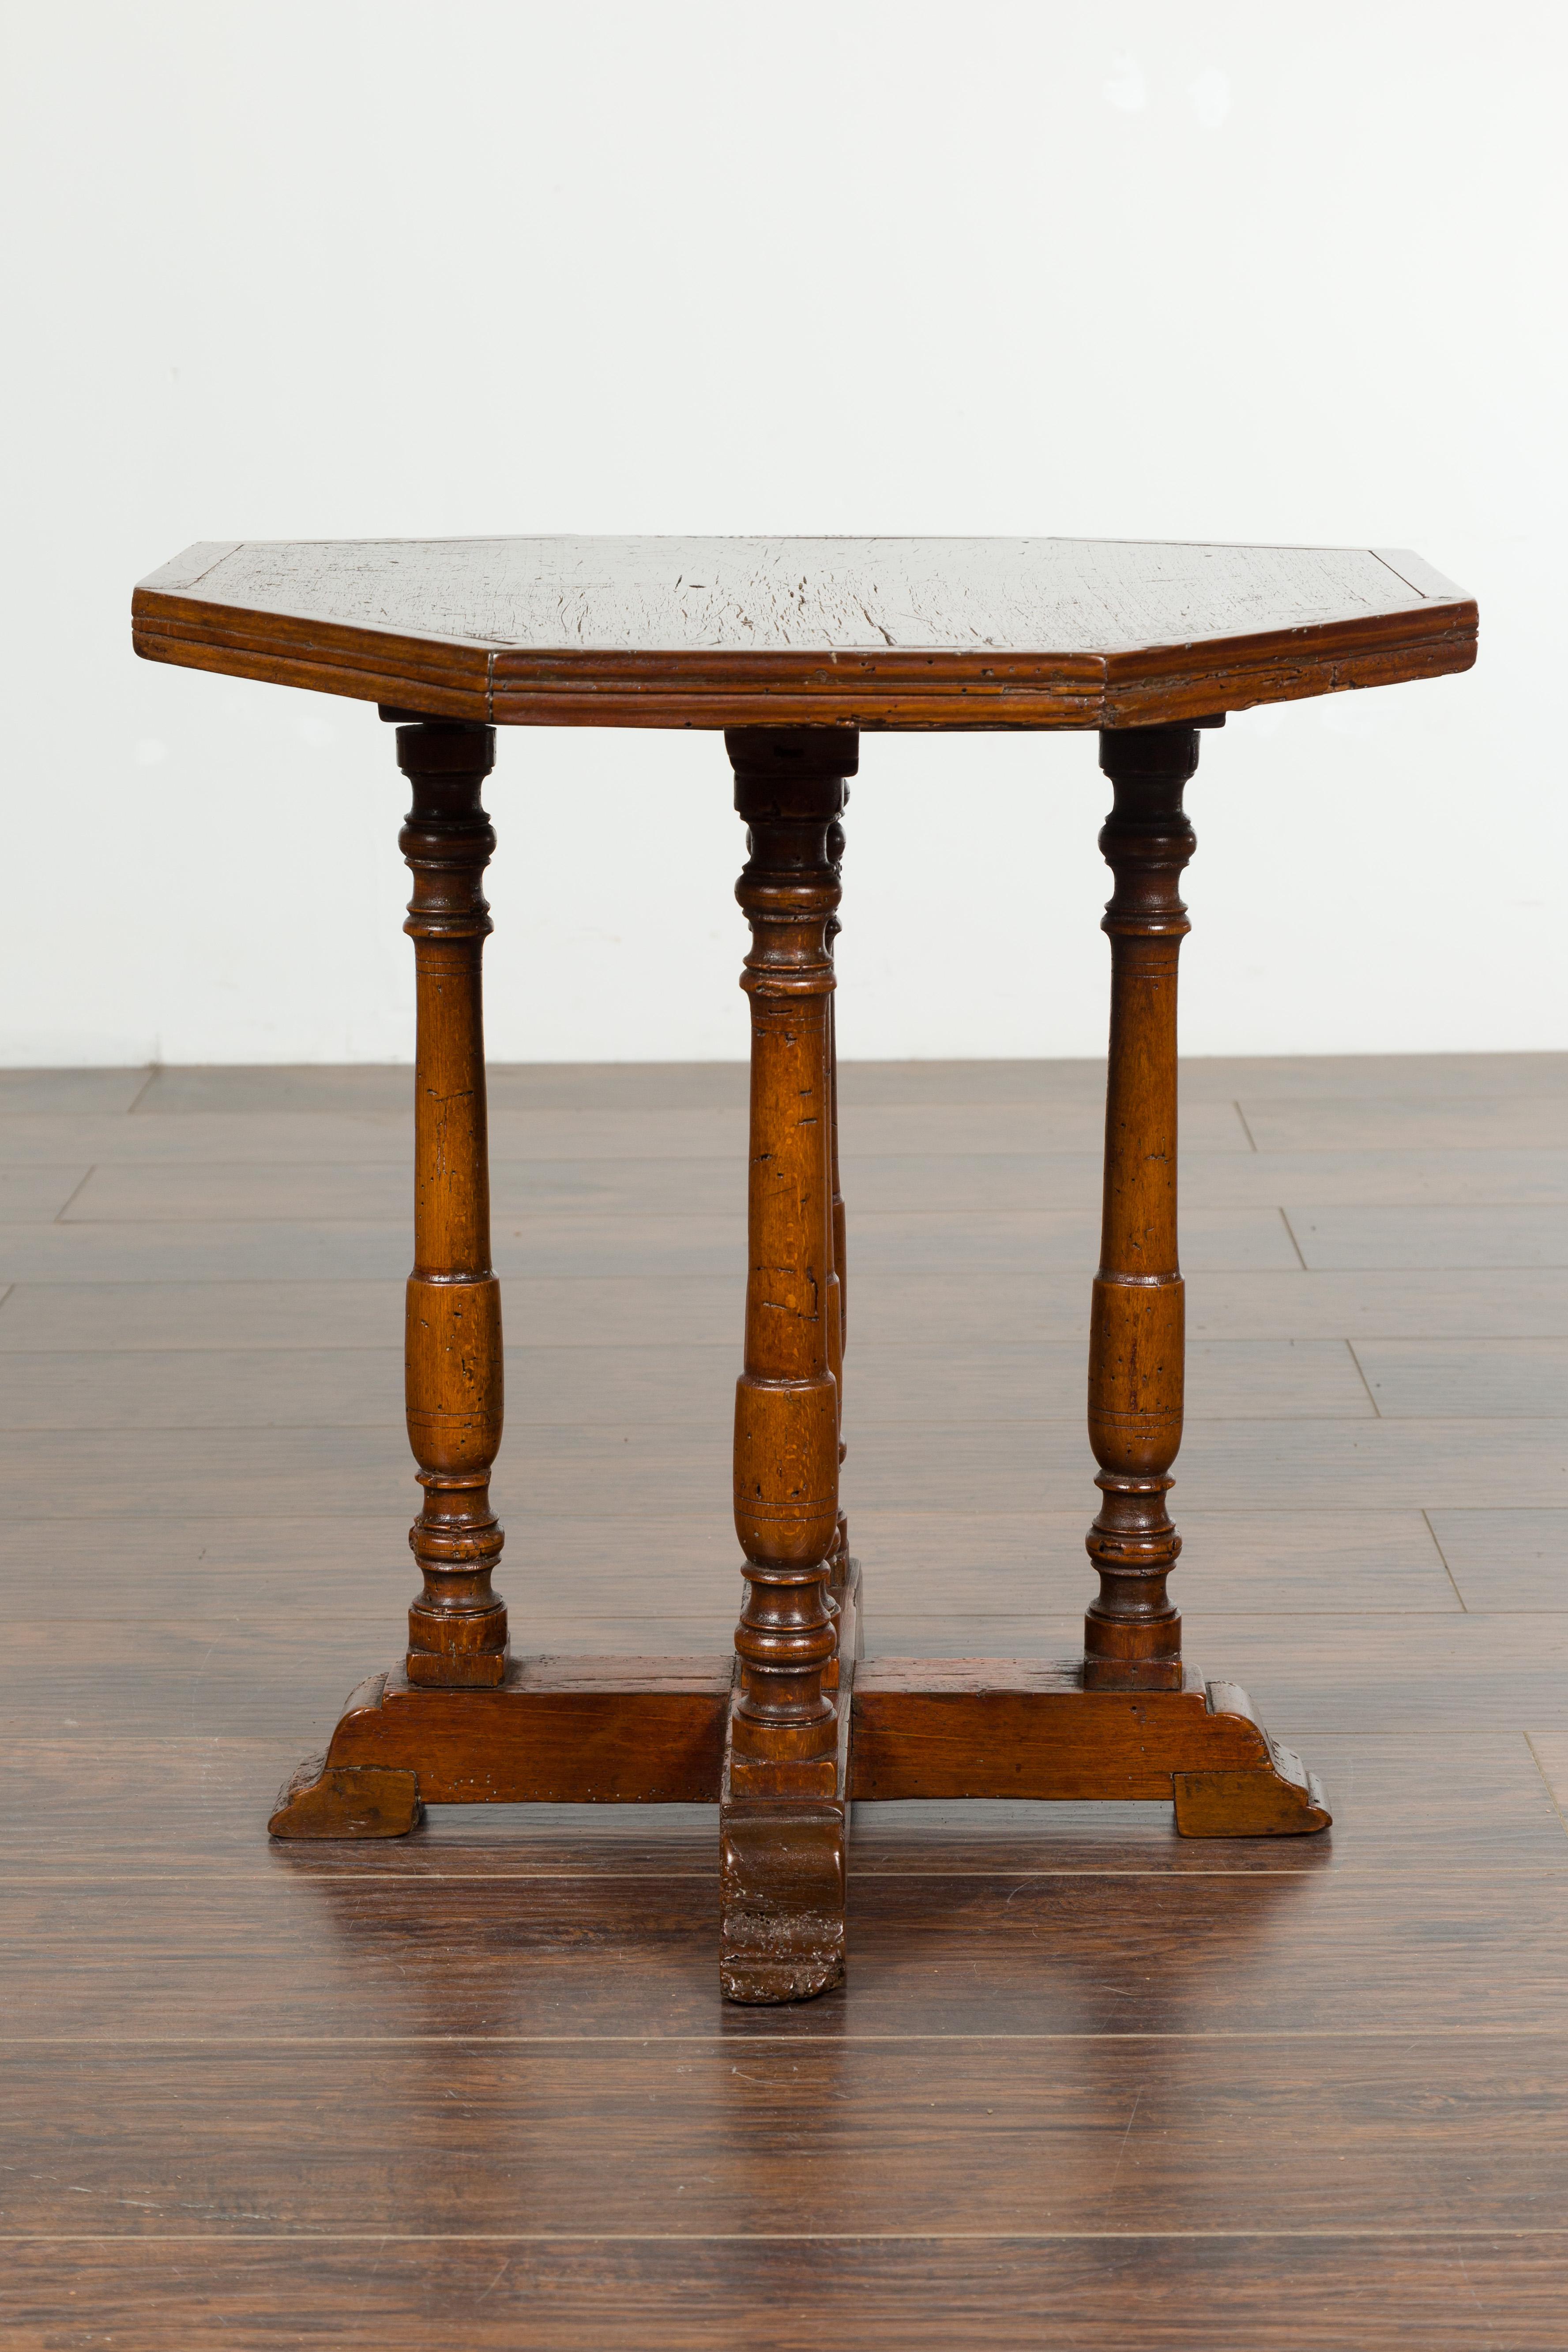 Walnut Italian 1800s Low Side table with Octagonal Top, Turned Legs and X-Form Plinth